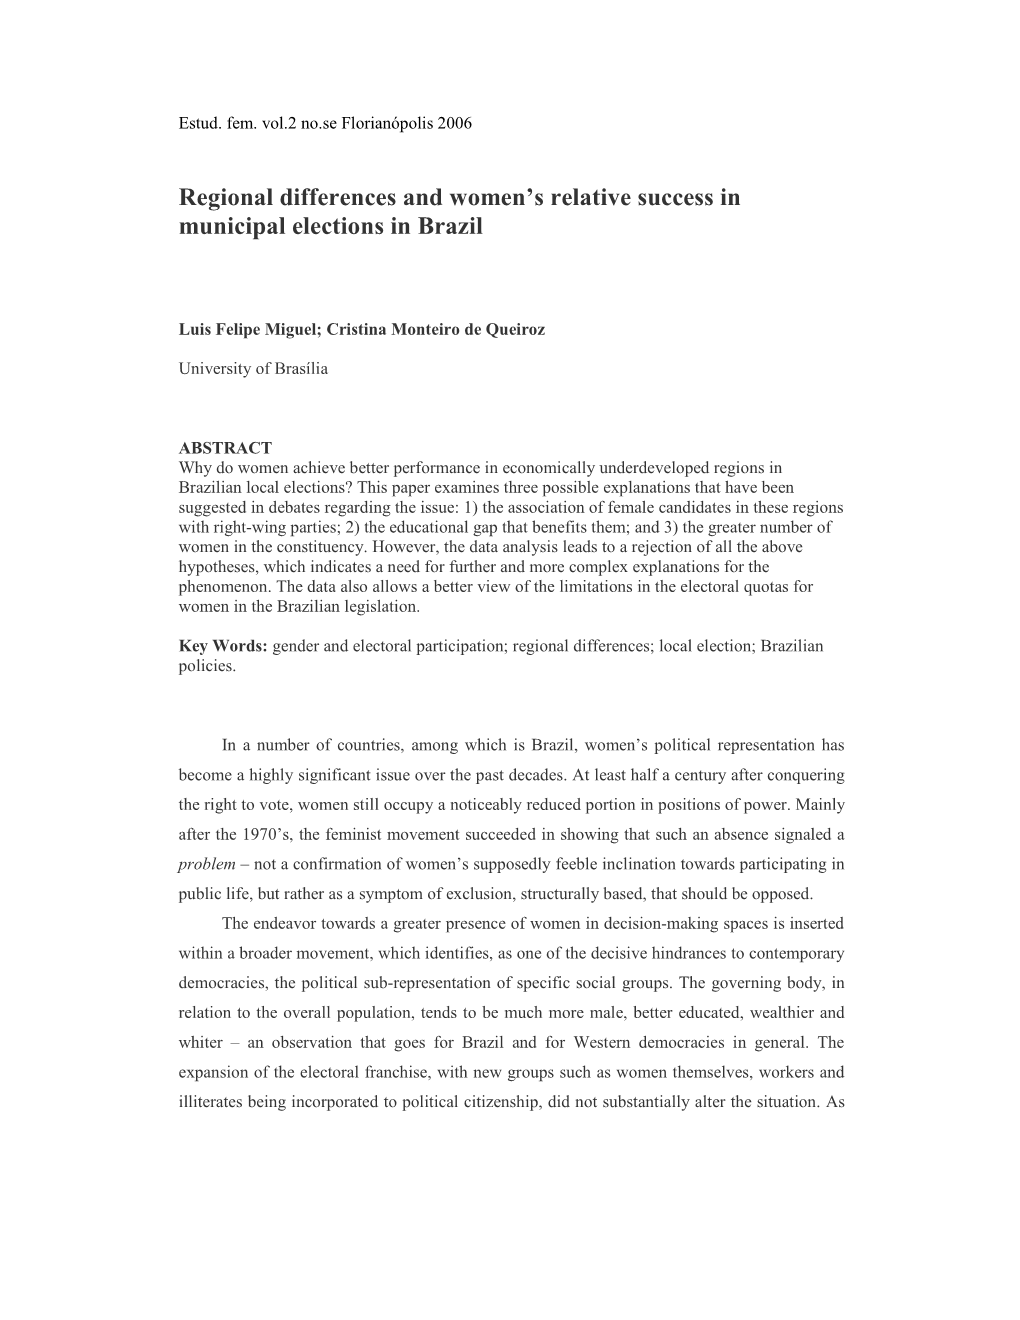 Regional Differences and Women's Relative Success in Municipal Elections in Brazil